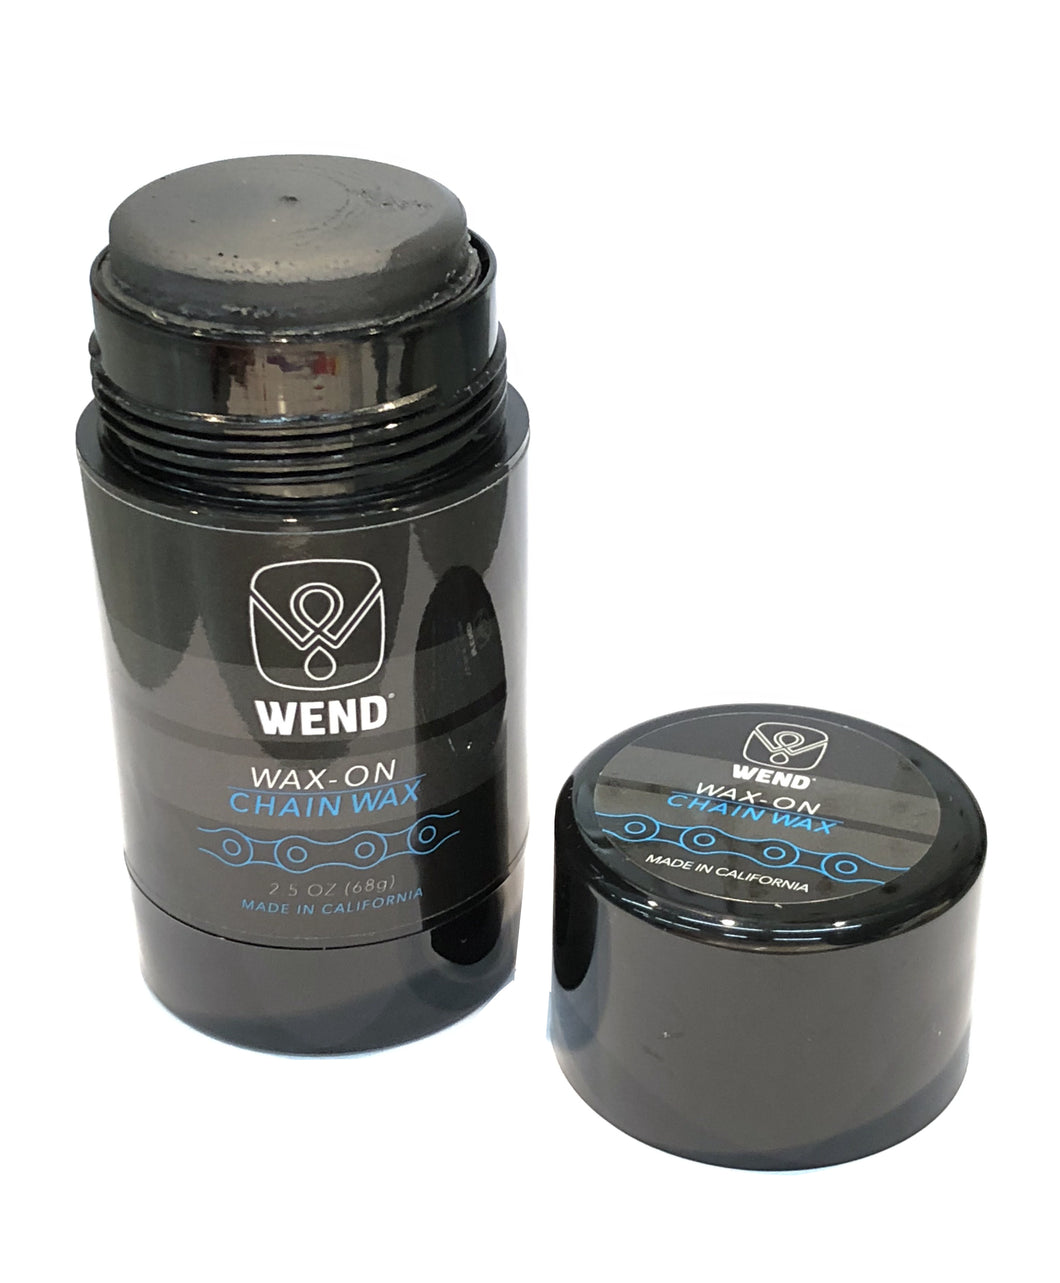 WEND WAX-ON CHAIN LUBE SPECTRUM COLORS - BLACK GRAPHITE 2.5OZ